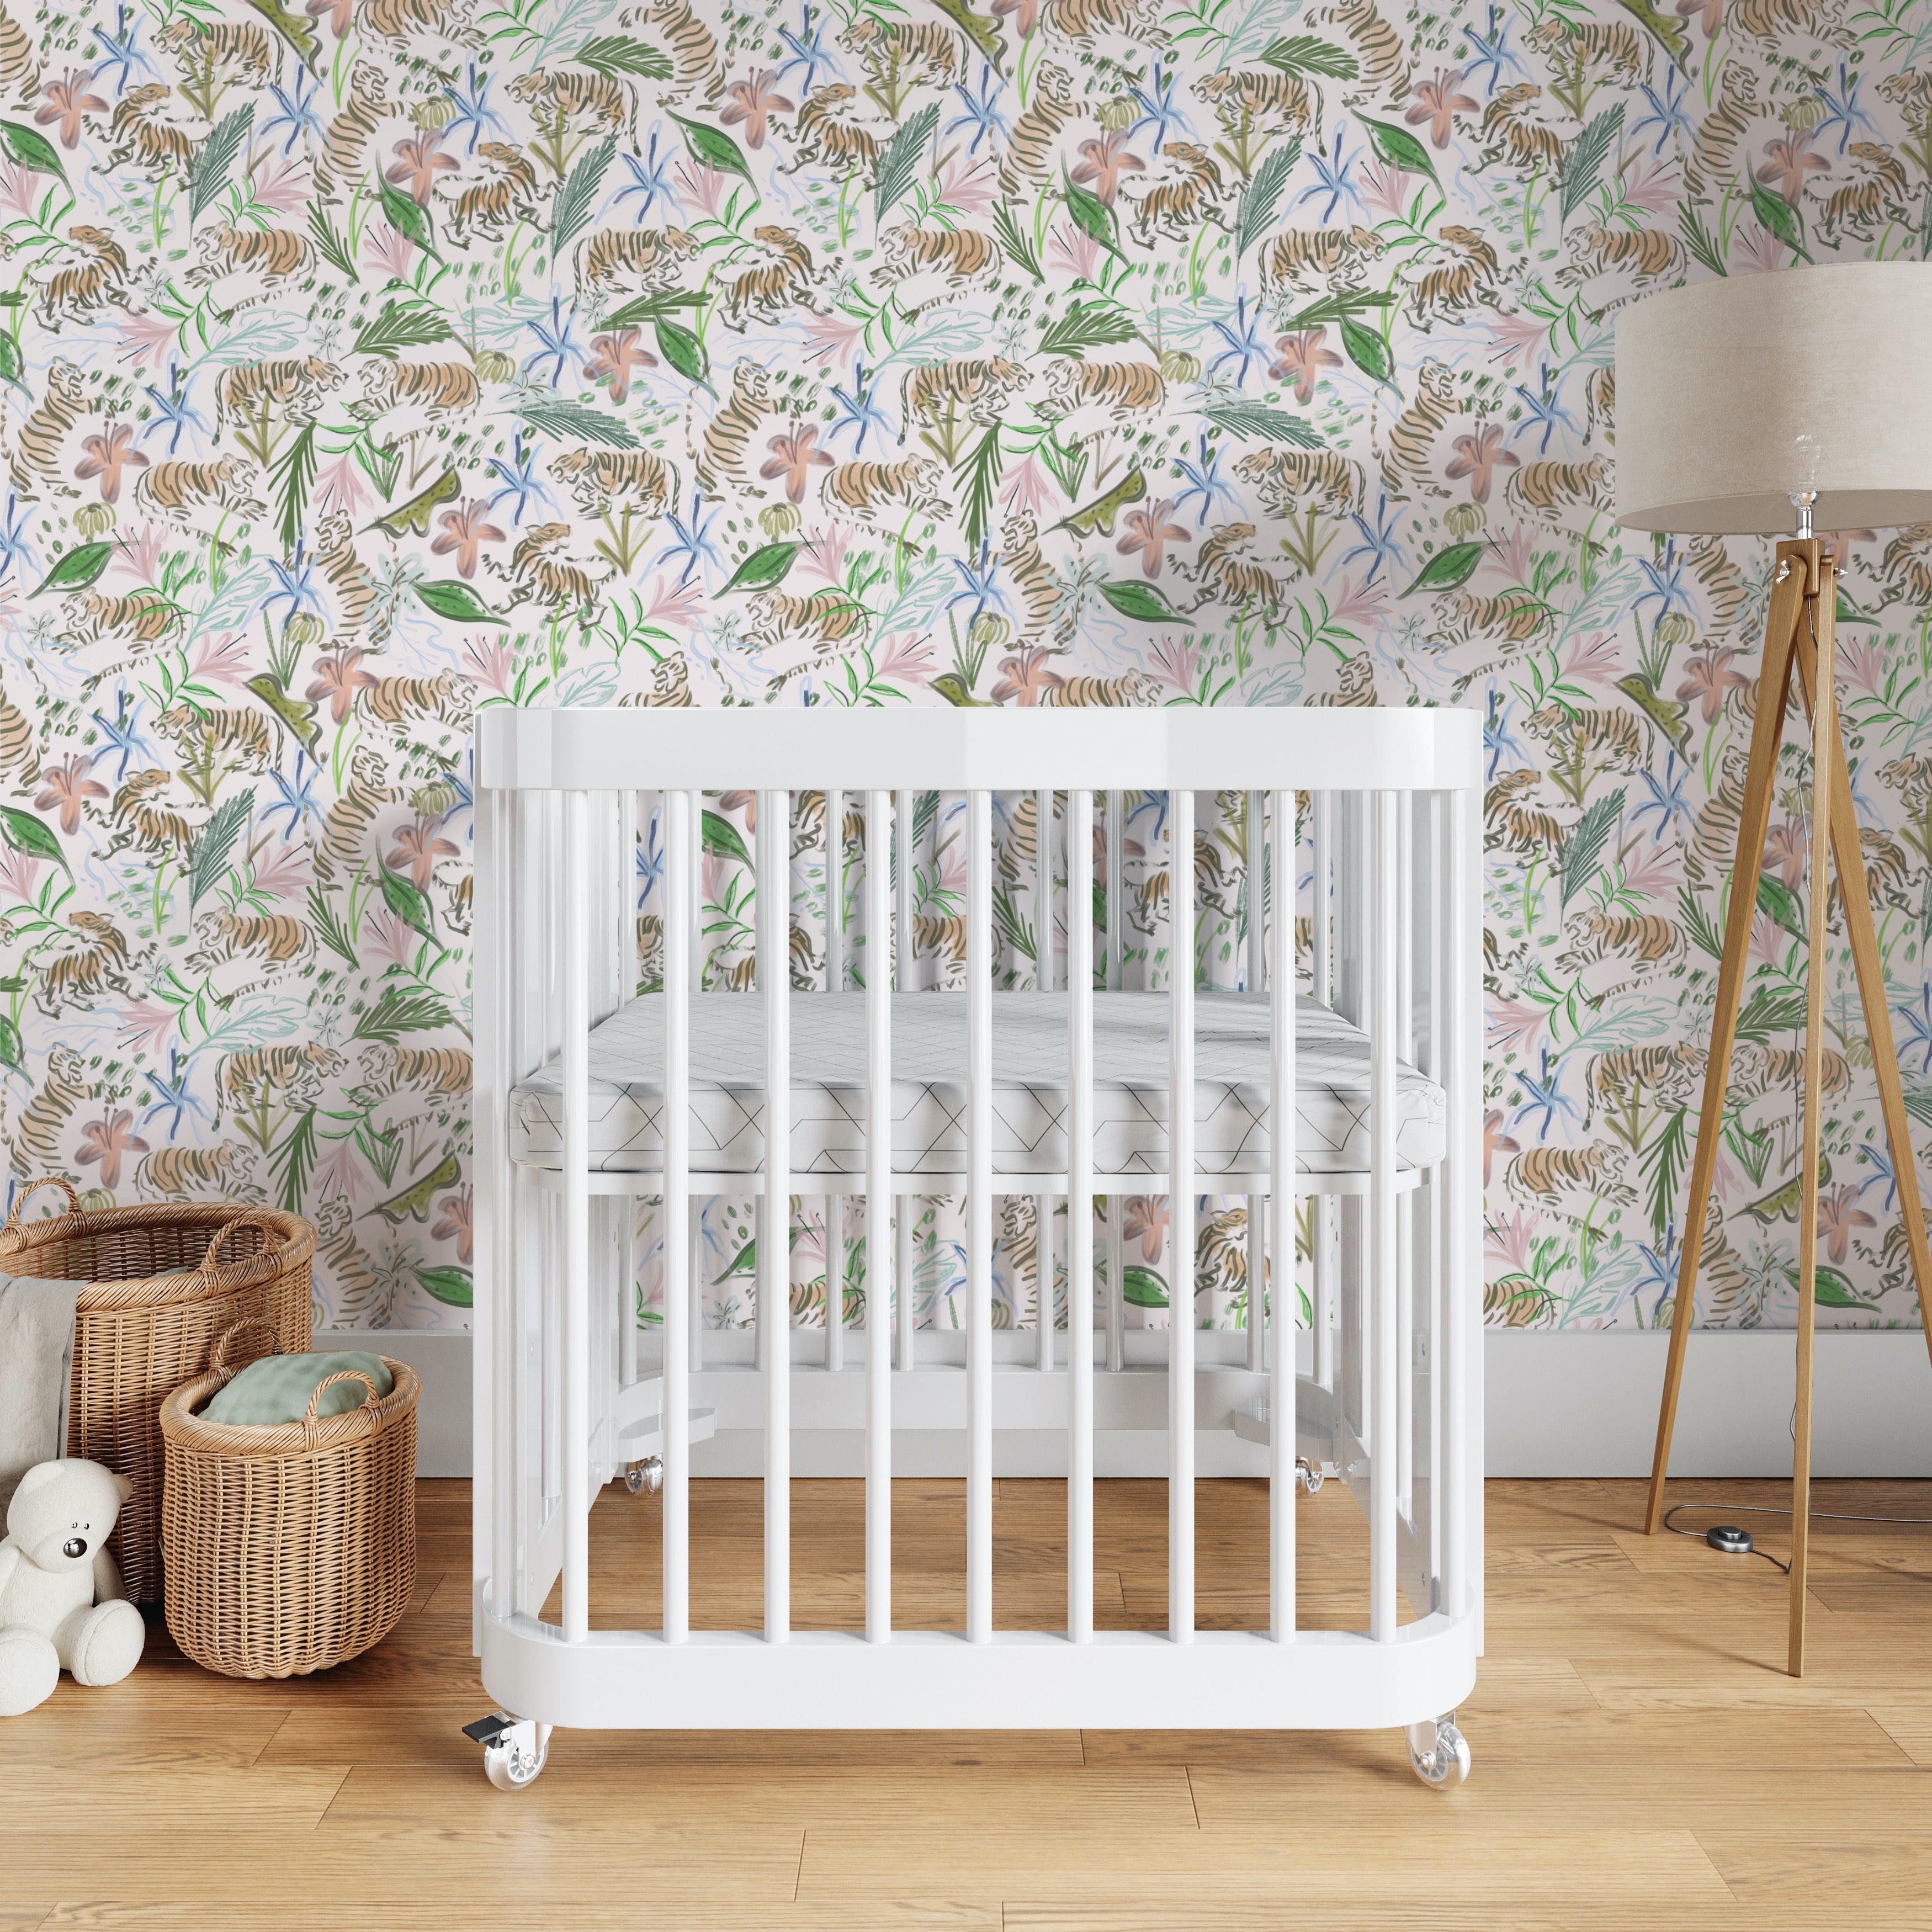 Nursery room styled with Pink Chinoiserie Tiger Printed Wallpaper and white crib next to two baskets and wooden lamp on the other side